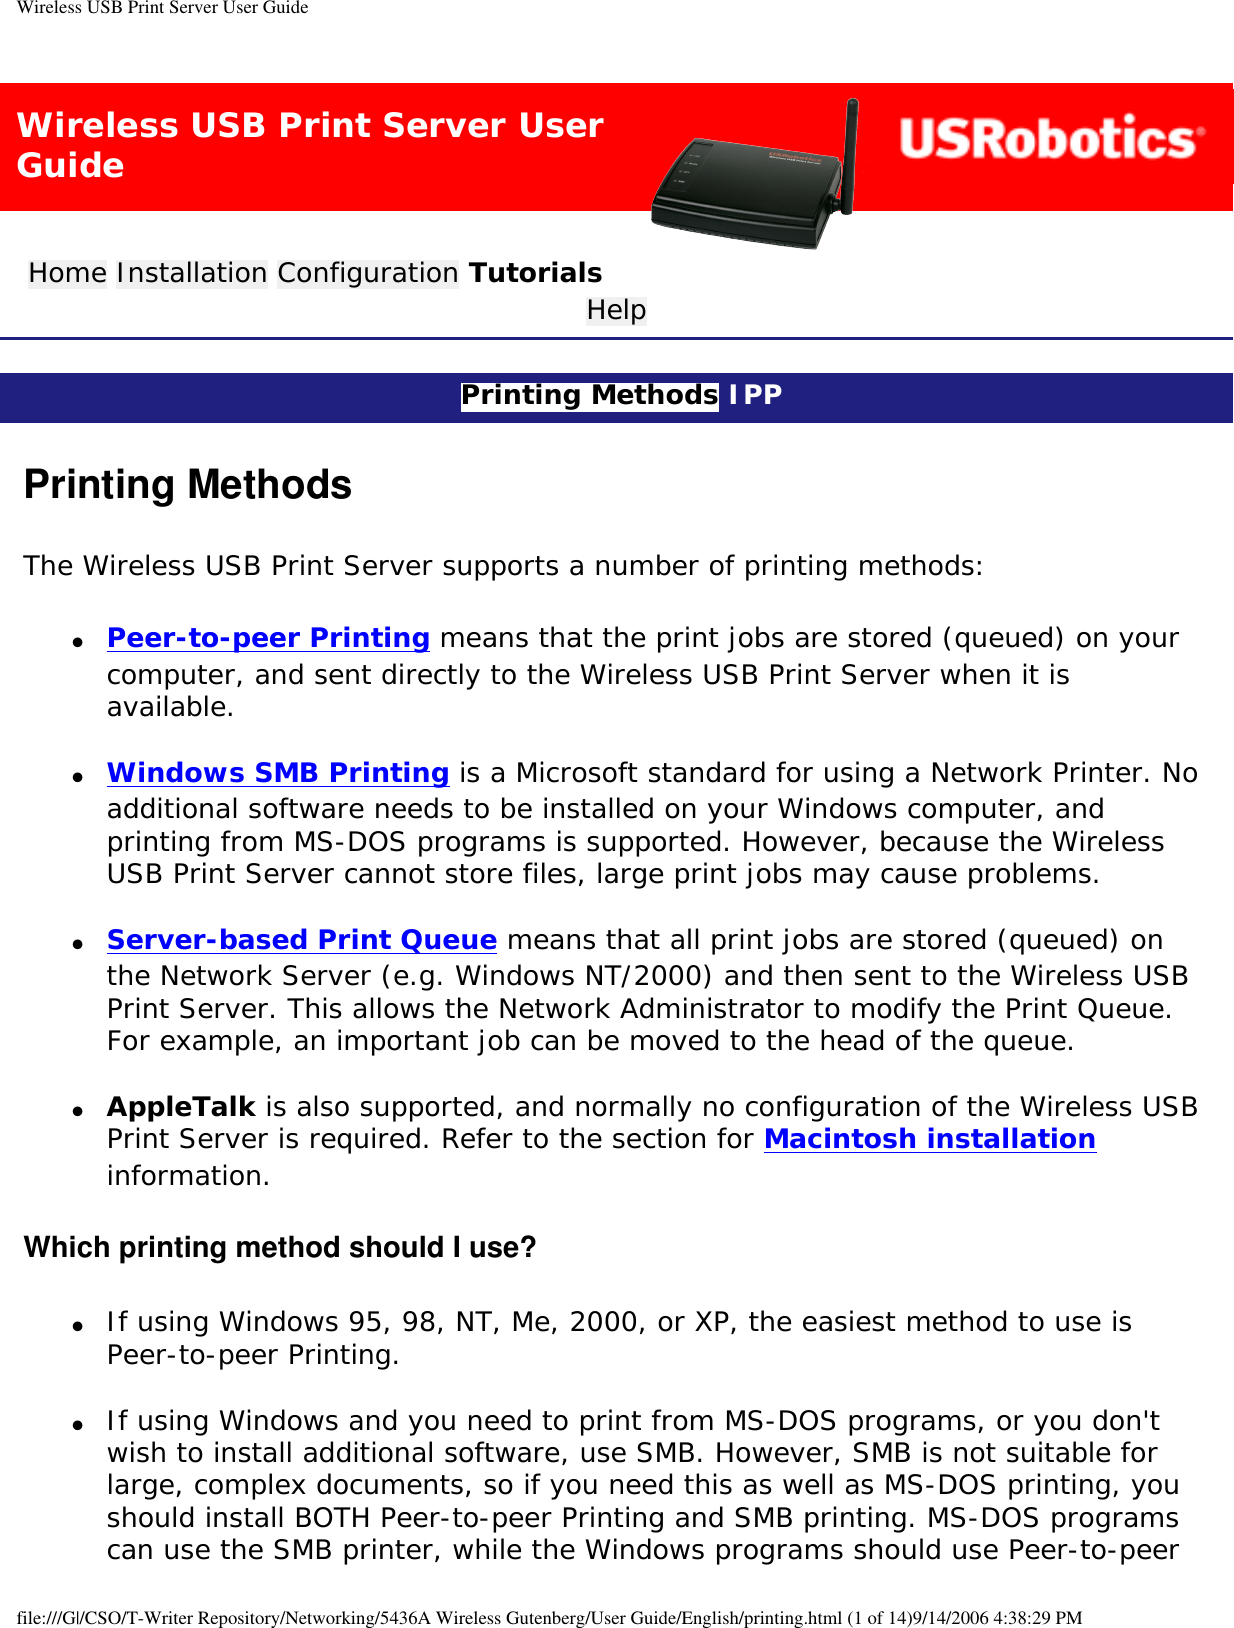 Wireless USB Print Server User GuideWireless USB Print Server User GuideHome Installation Configuration Tutorials Help Printing Methods IPP Printing MethodsThe Wireless USB Print Server supports a number of printing methods:●     Peer-to-peer Printing means that the print jobs are stored (queued) on your computer, and sent directly to the Wireless USB Print Server when it is available. ●     Windows SMB Printing is a Microsoft standard for using a Network Printer. No additional software needs to be installed on your Windows computer, and printing from MS-DOS programs is supported. However, because the Wireless USB Print Server cannot store files, large print jobs may cause problems. ●     Server-based Print Queue means that all print jobs are stored (queued) on the Network Server (e.g. Windows NT/2000) and then sent to the Wireless USB Print Server. This allows the Network Administrator to modify the Print Queue. For example, an important job can be moved to the head of the queue. ●     AppleTalk is also supported, and normally no configuration of the Wireless USB Print Server is required. Refer to the section for Macintosh installation information. Which printing method should I use?●     If using Windows 95, 98, NT, Me, 2000, or XP, the easiest method to use is Peer-to-peer Printing. ●     If using Windows and you need to print from MS-DOS programs, or you don&apos;t wish to install additional software, use SMB. However, SMB is not suitable for large, complex documents, so if you need this as well as MS-DOS printing, you should install BOTH Peer-to-peer Printing and SMB printing. MS-DOS programs can use the SMB printer, while the Windows programs should use Peer-to-peer file:///G|/CSO/T-Writer Repository/Networking/5436A Wireless Gutenberg/User Guide/English/printing.html (1 of 14)9/14/2006 4:38:29 PM